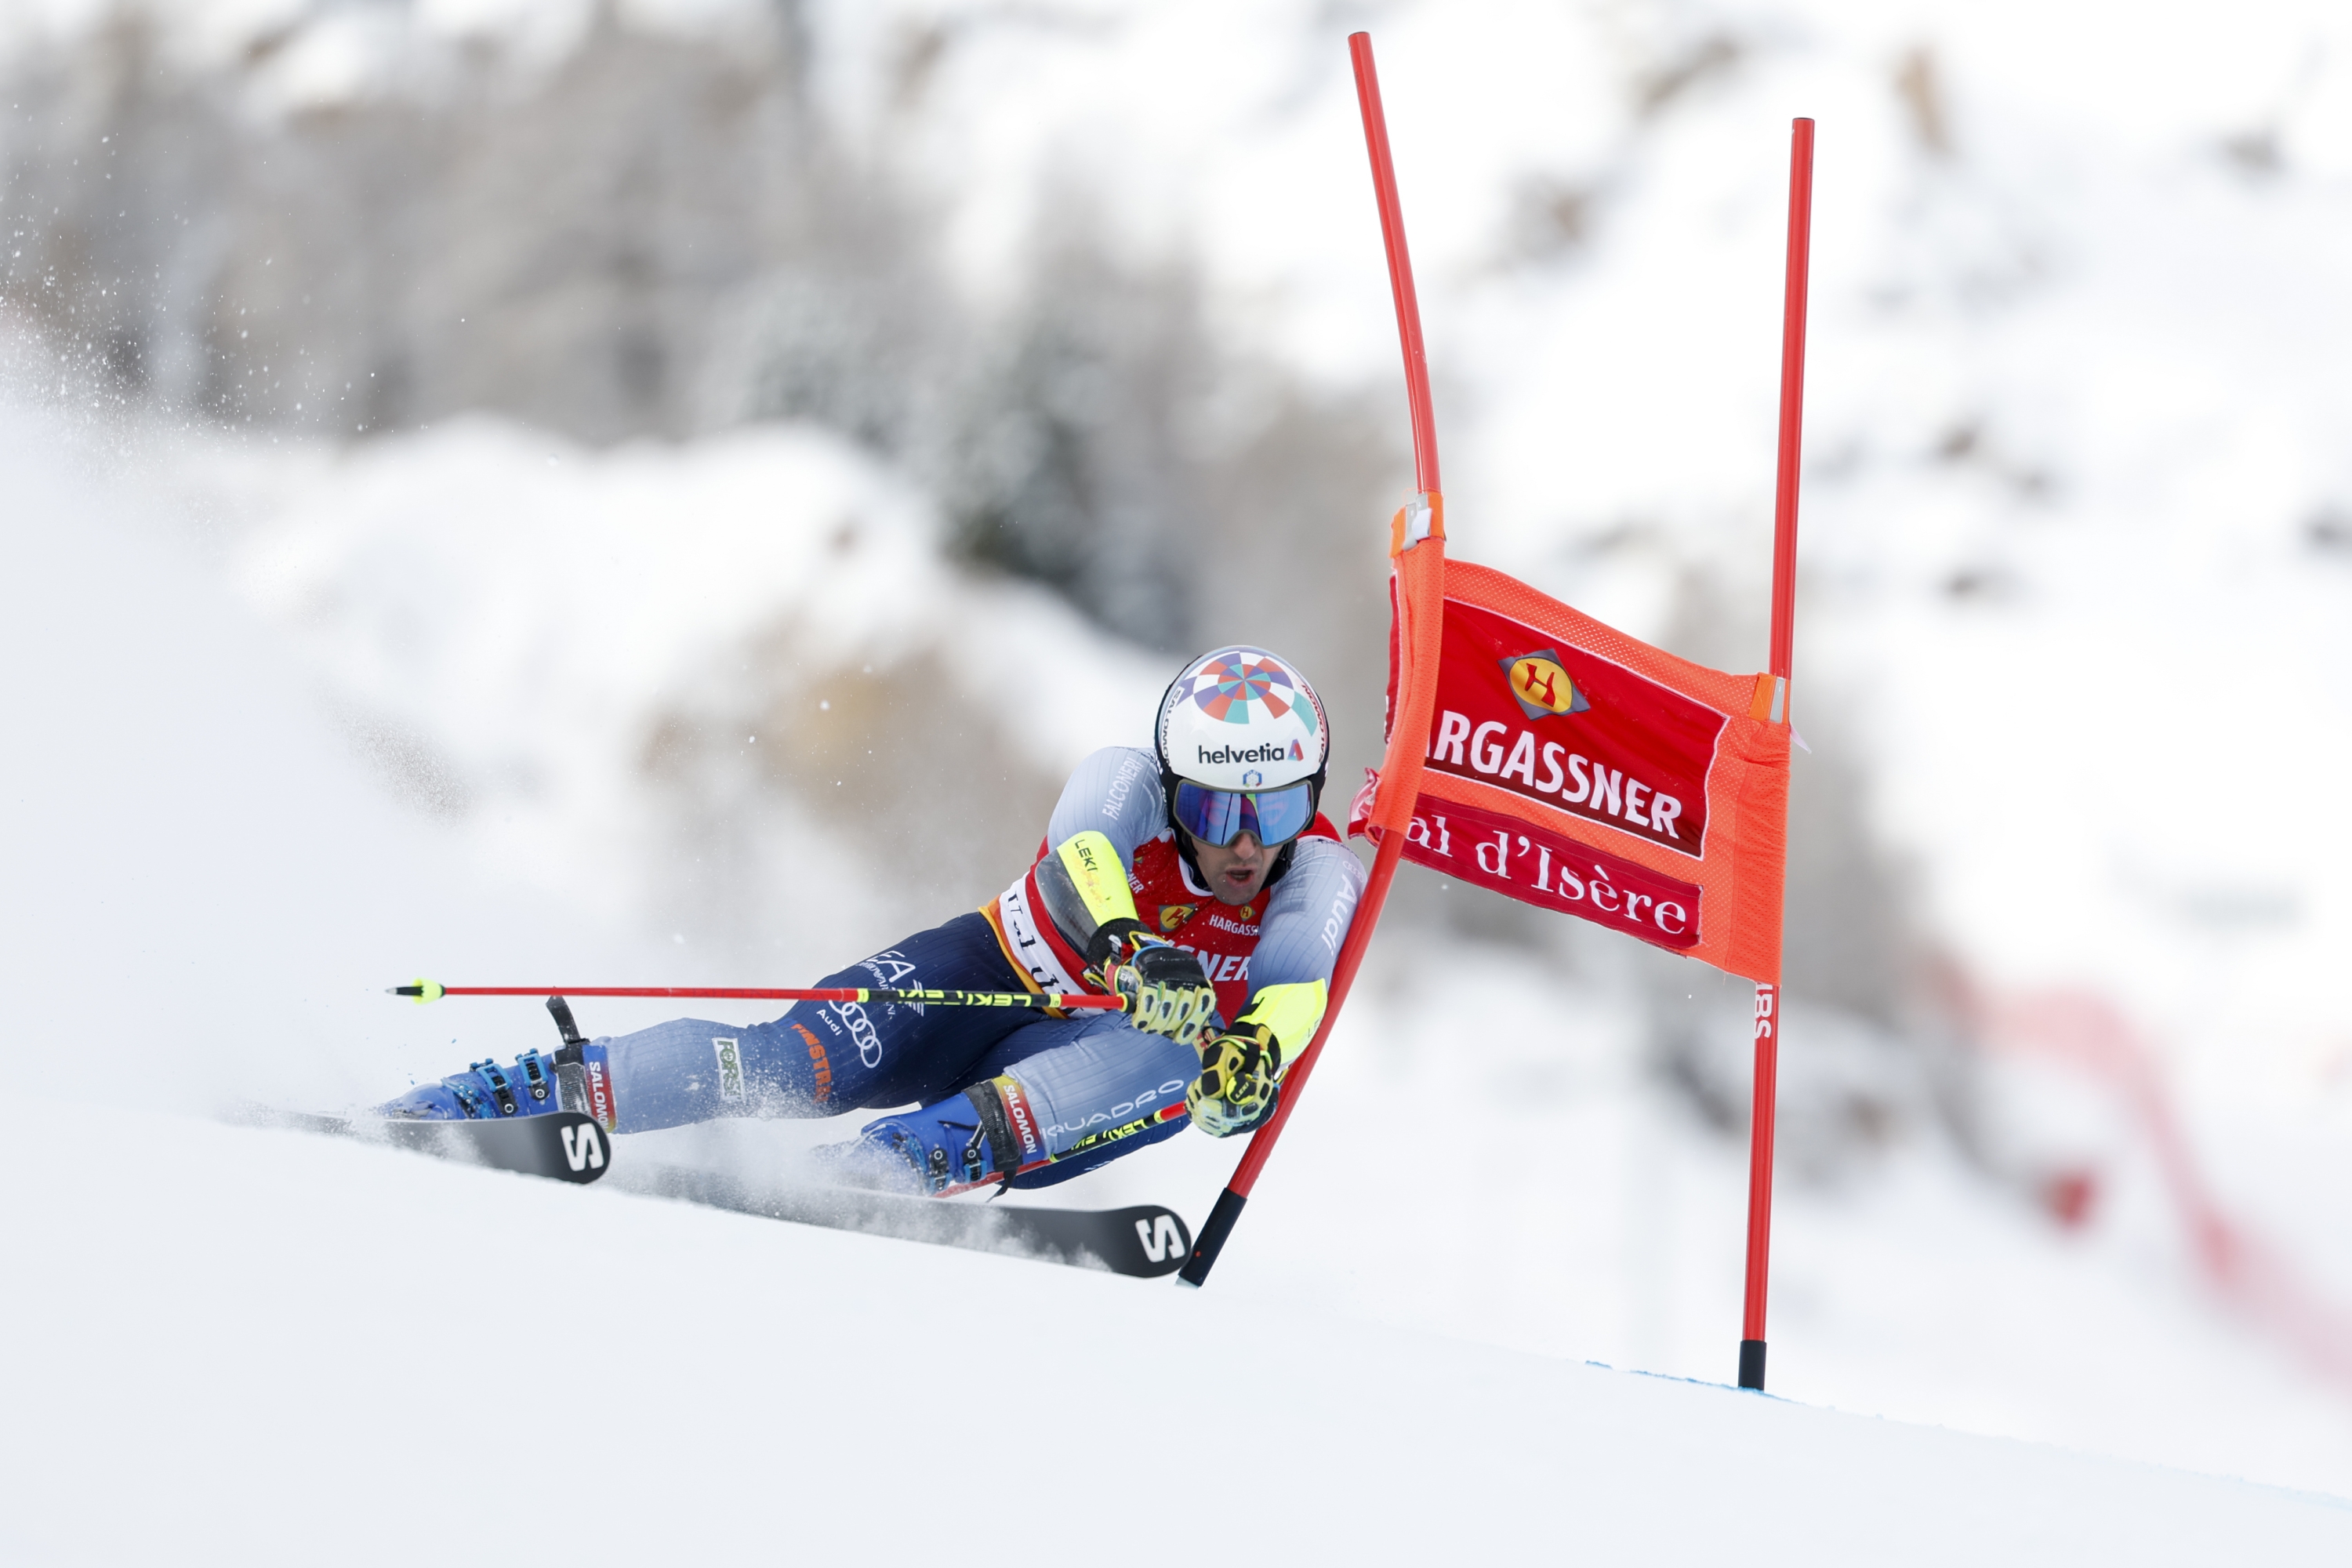 VAL D'ISERE, FRANCE - DECEMBER 9: Luca De Aliprandini of Team Italy in action during the Audi FIS Alpine Ski World Cup Men's Giant Slalom on December 9, 2023 in Val d'Isere, France. (Photo by Alexis Boichard/Agence Zoom/Getty Images)